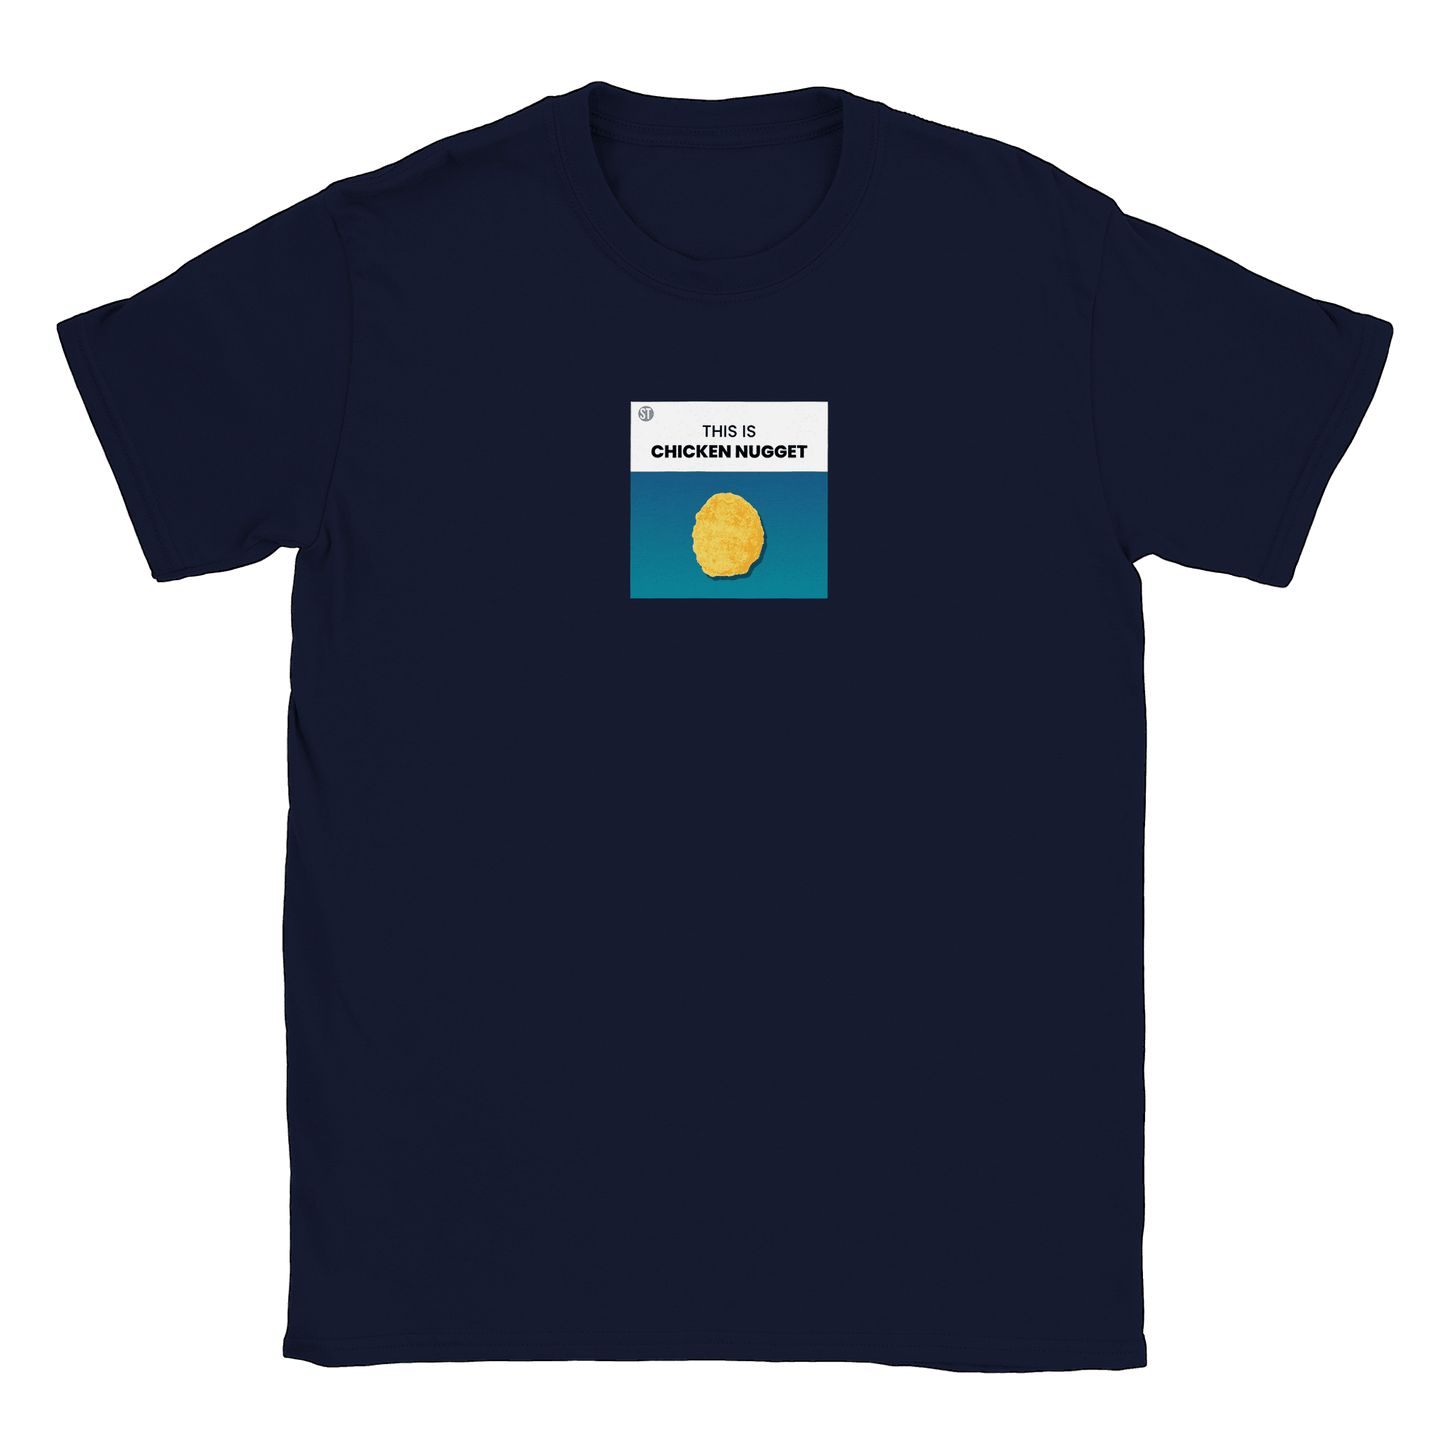 This is Chicken Nugget - T-shirt Navy